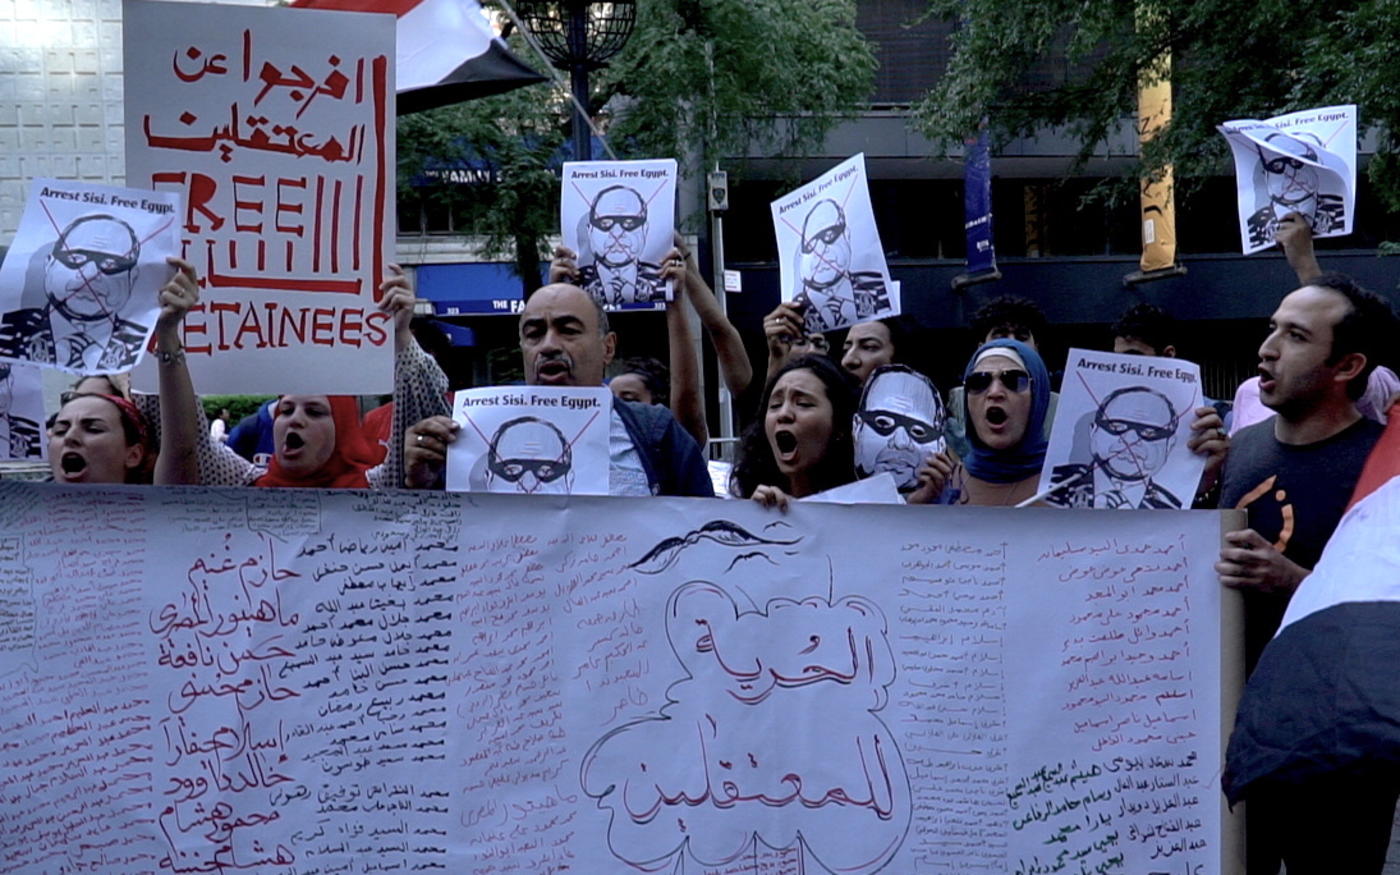 Activists compiled names of all 2,200 detainees on a banner and demand for their release  [MEE/Azad Essa]